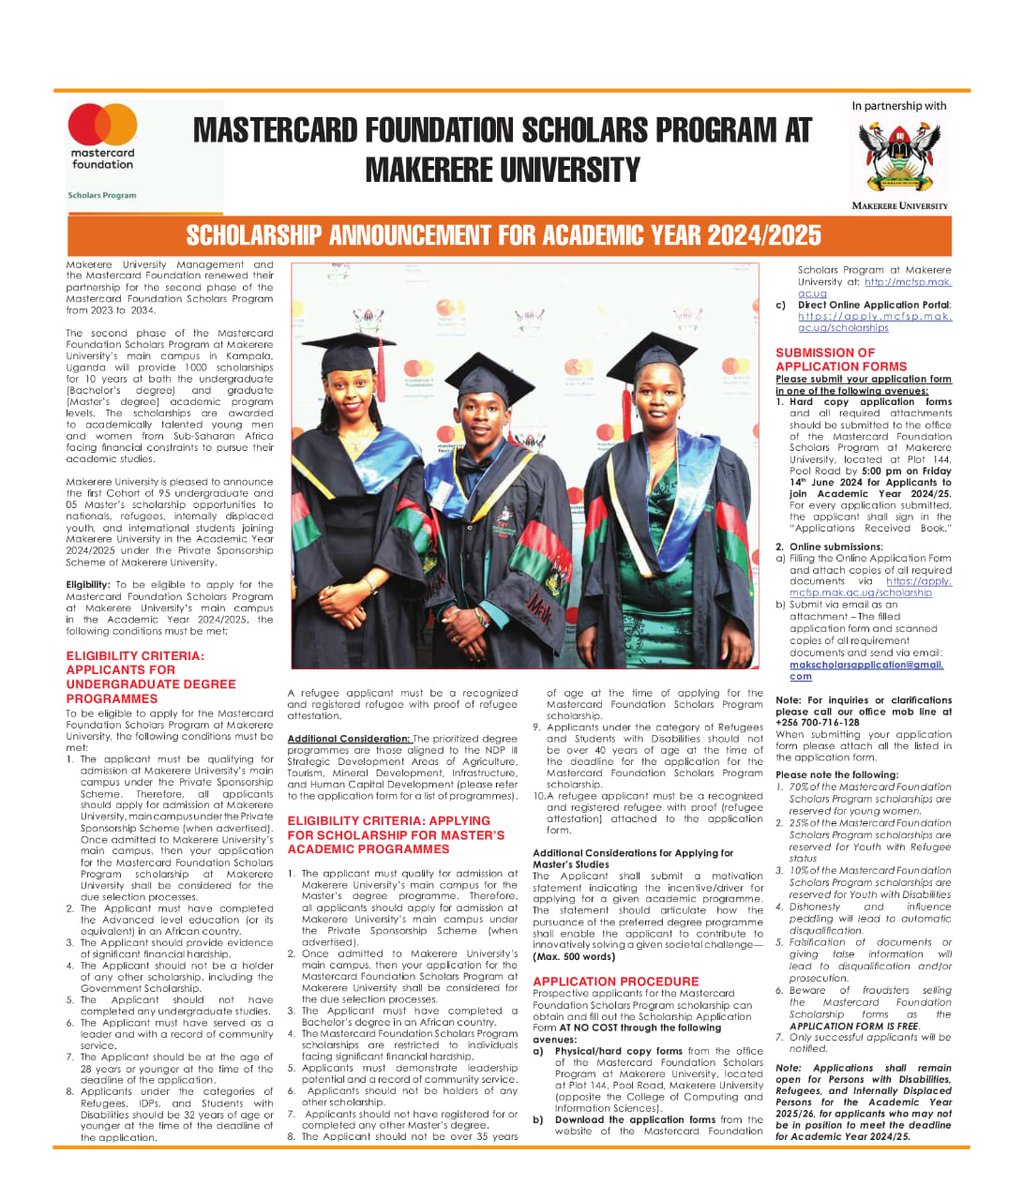 '🎓 Exciting News! The Mastercard Foundation Scholarship at Makerere University is now open for applications! This incredible opportunity provides fully-funded scholarships for undergraduate students who demonstrate academic excellence and leadership potential.